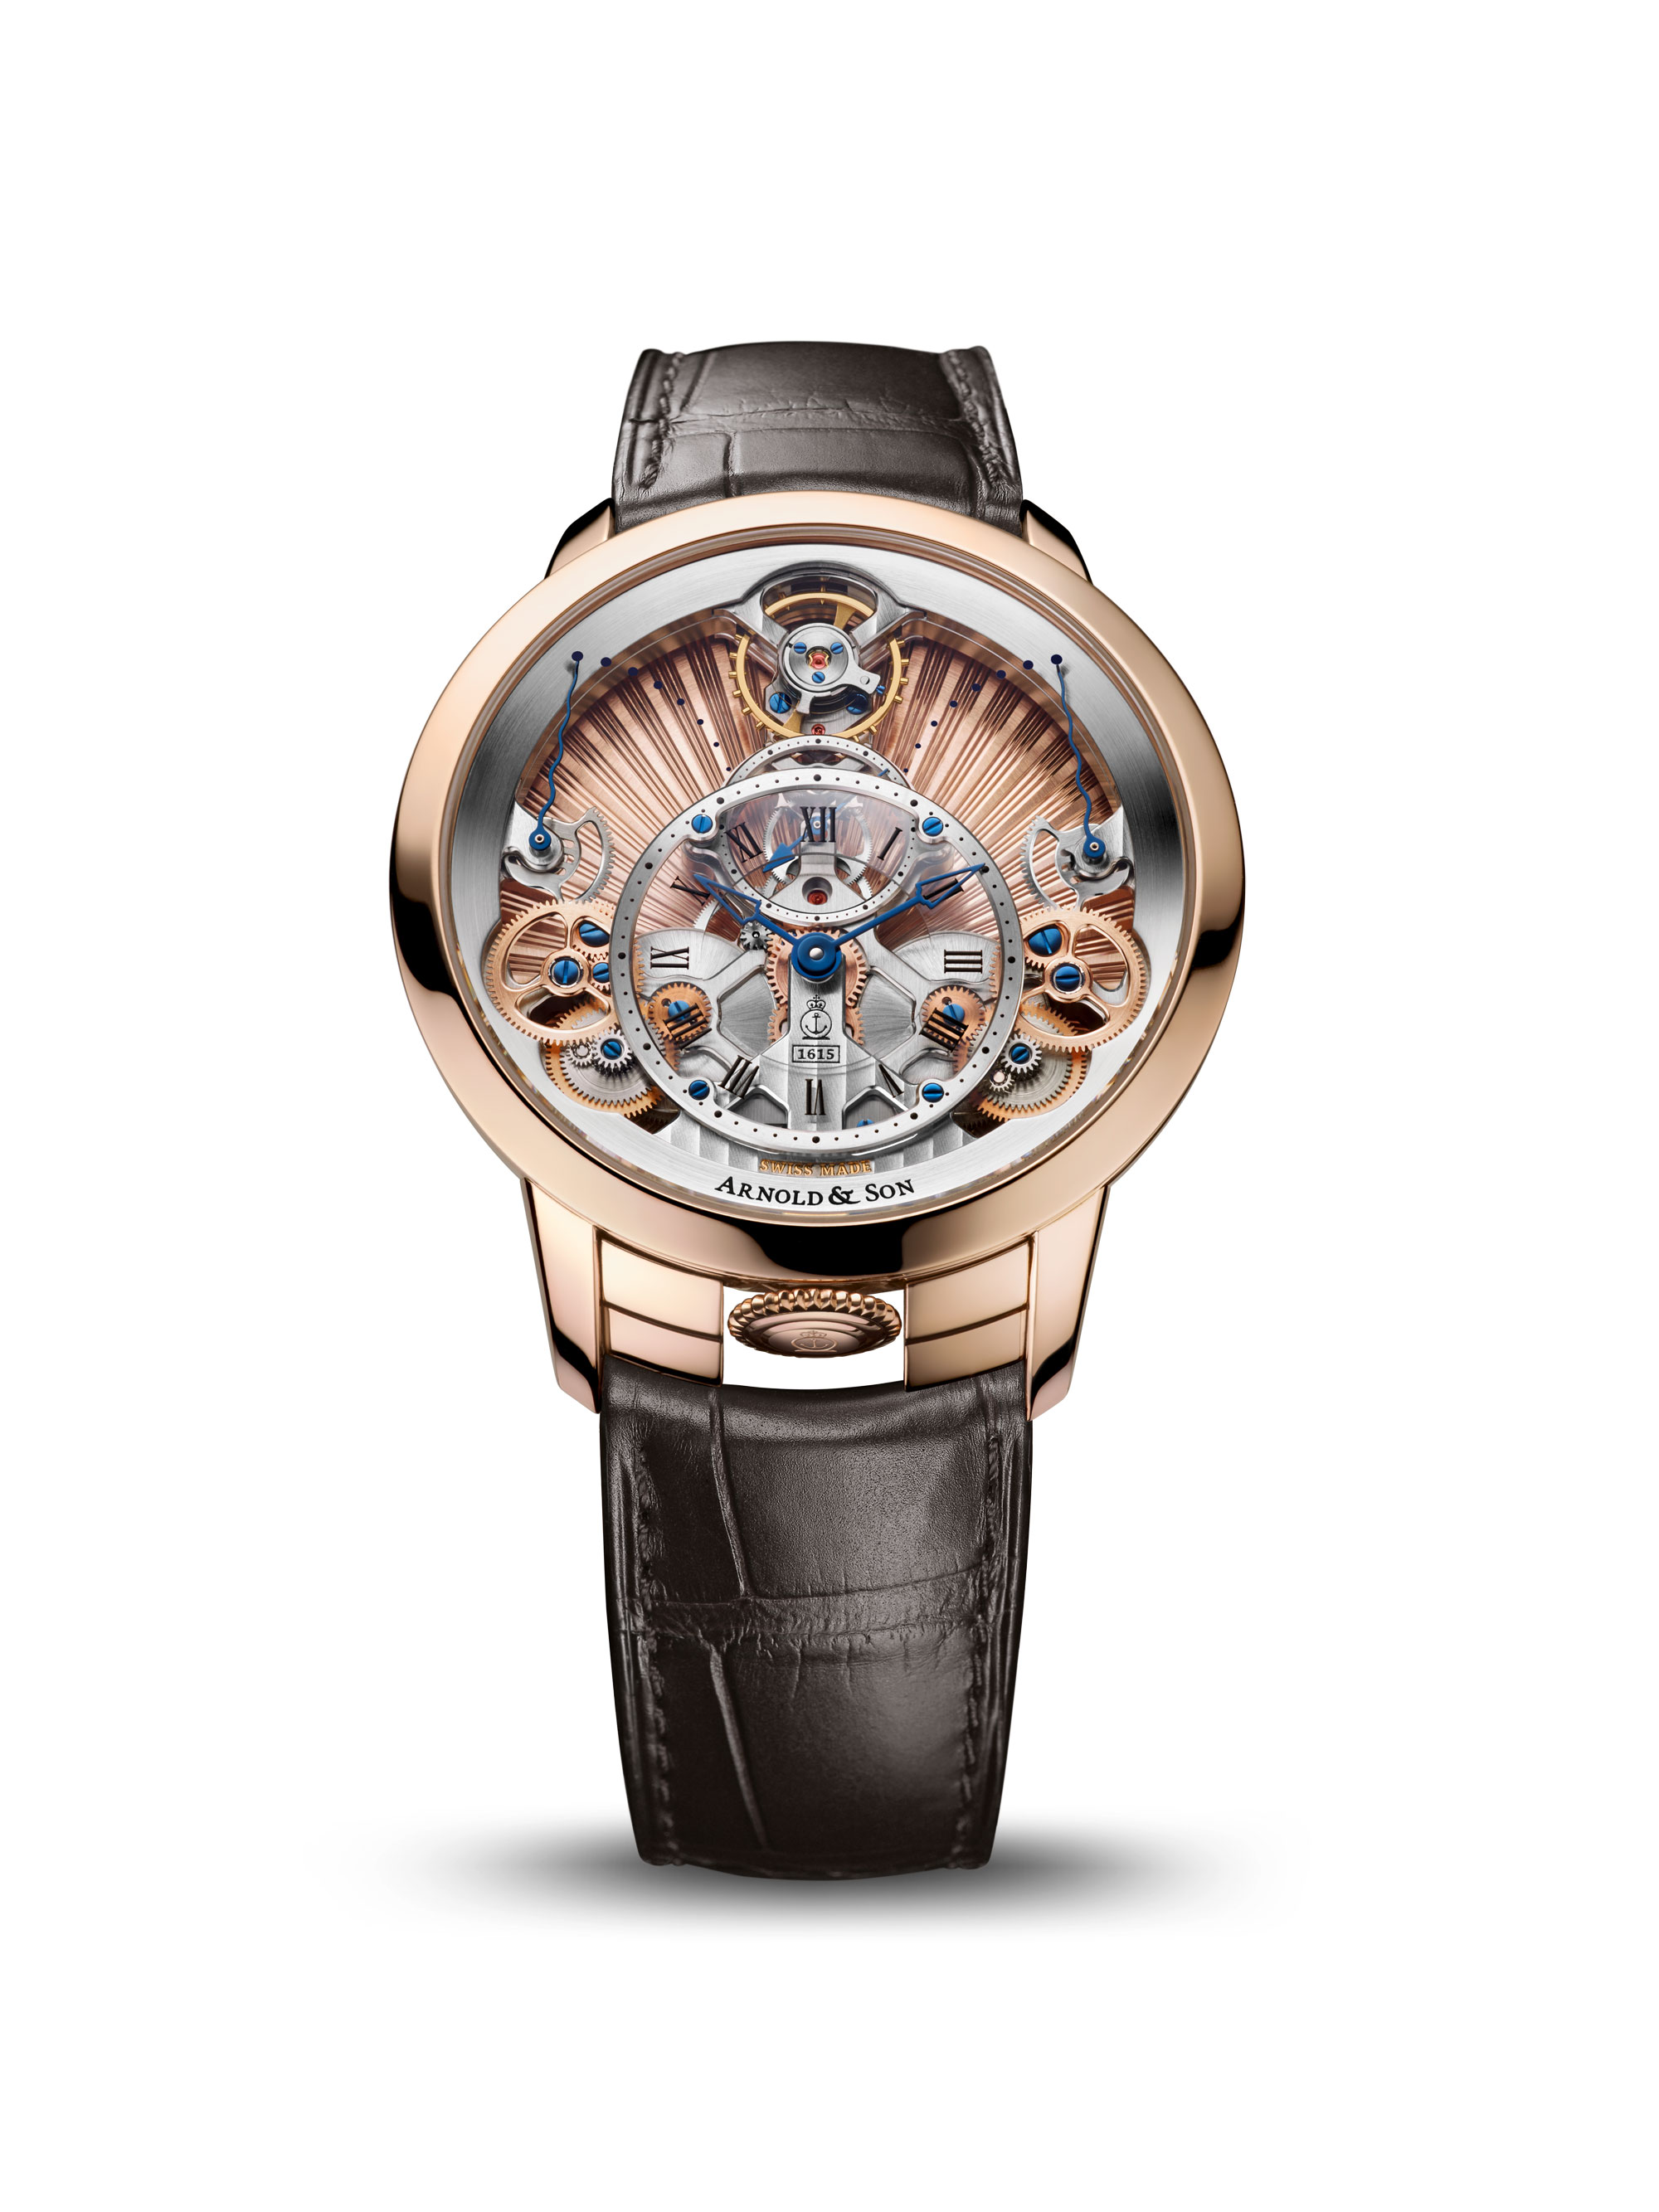 Iconic Timepiece-Arnold & Son Instrument Time Pyramid Guilloché